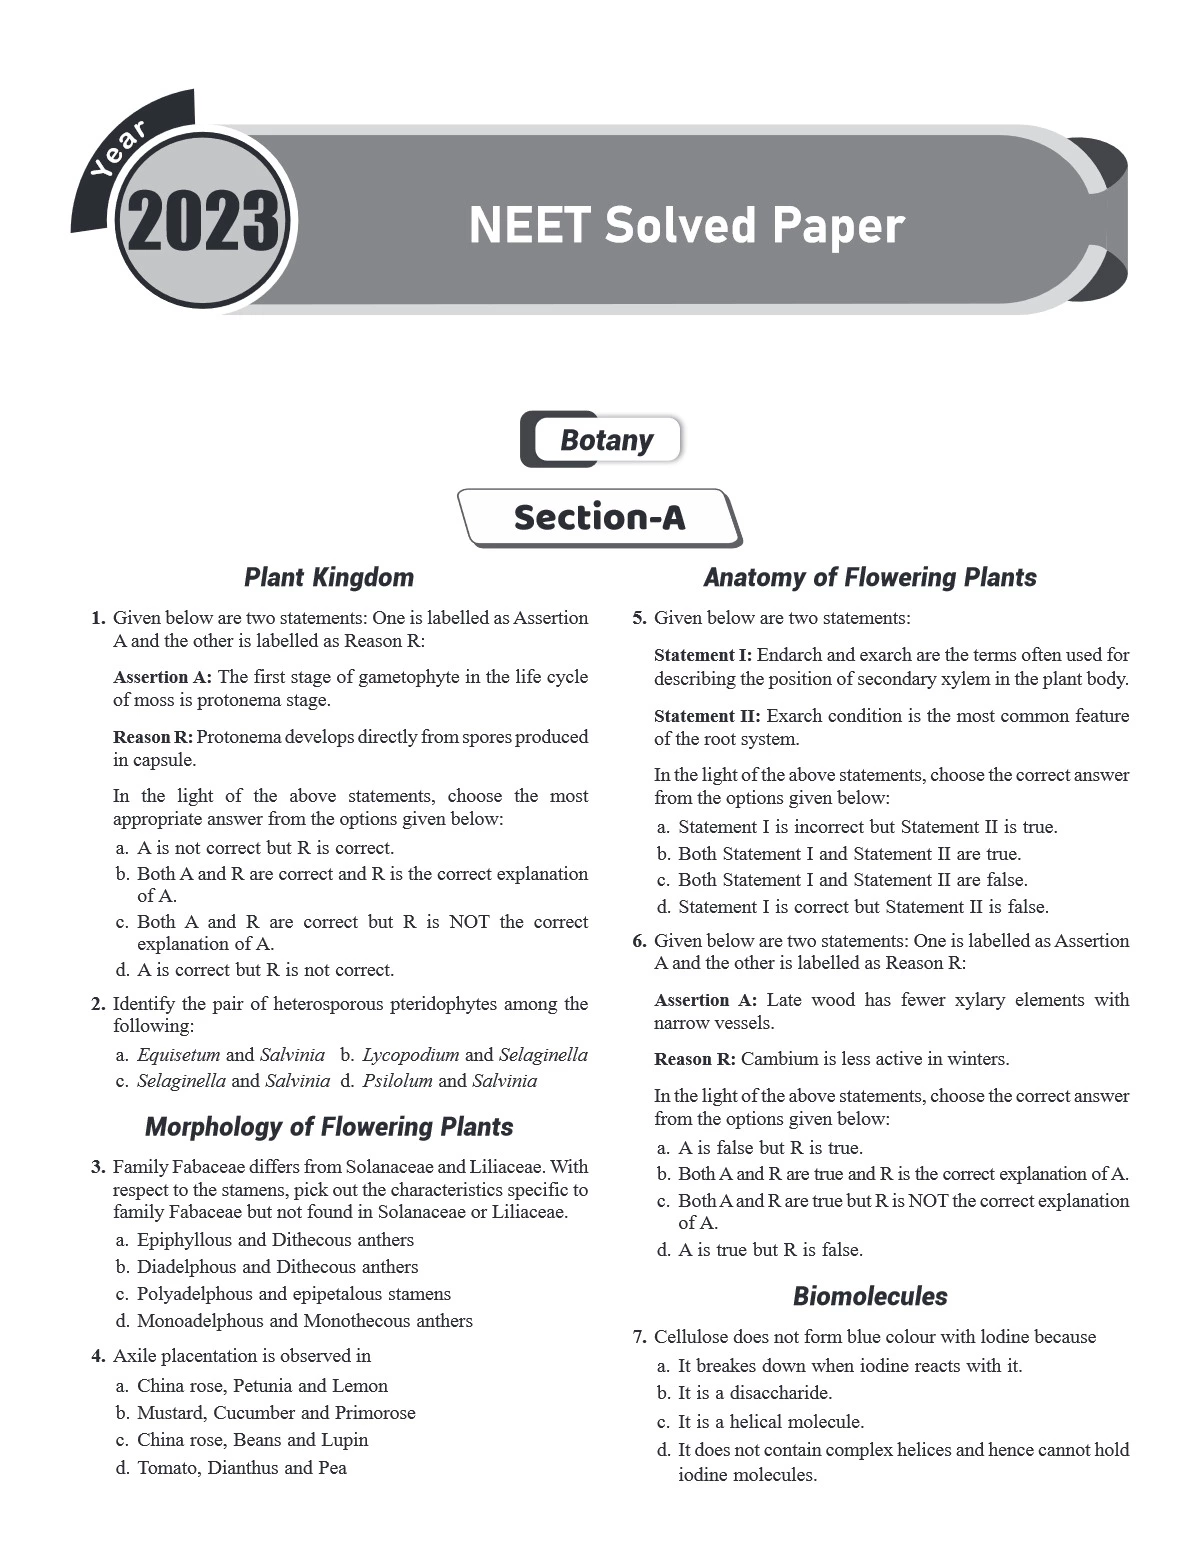 NEET Previous Year Question Papers (2014-2023)